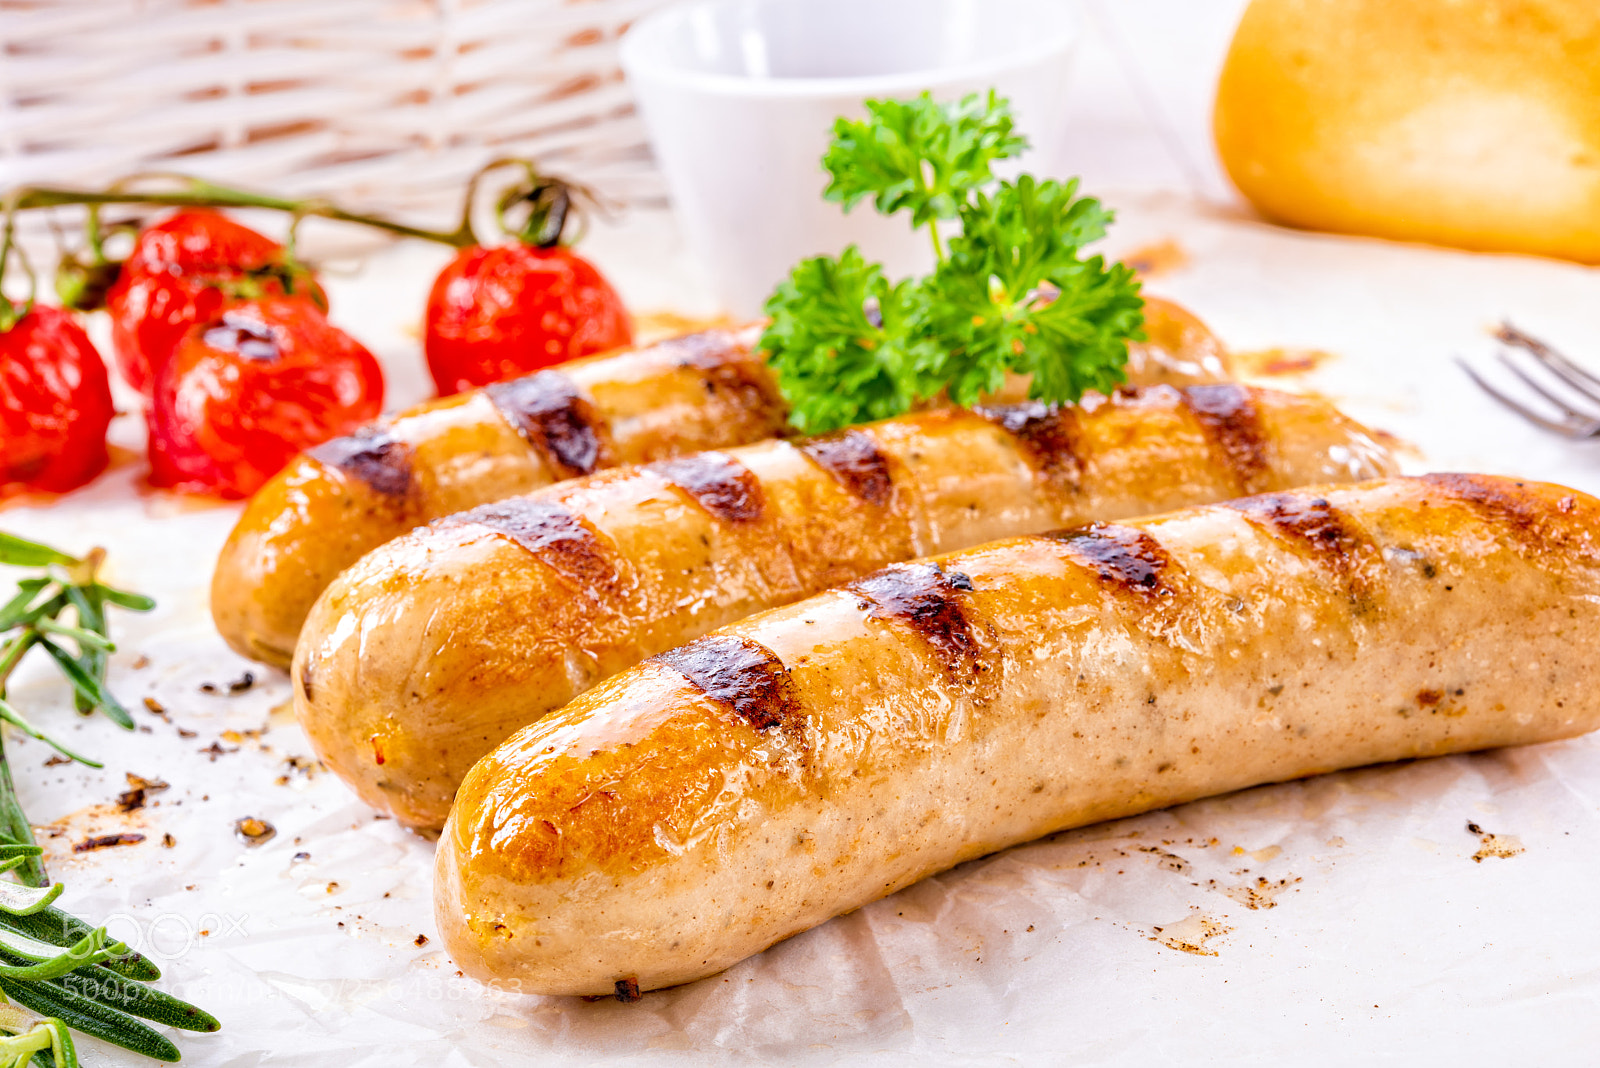 Nikon D810 sample photo. Delicious bratwurst with ketchup photography